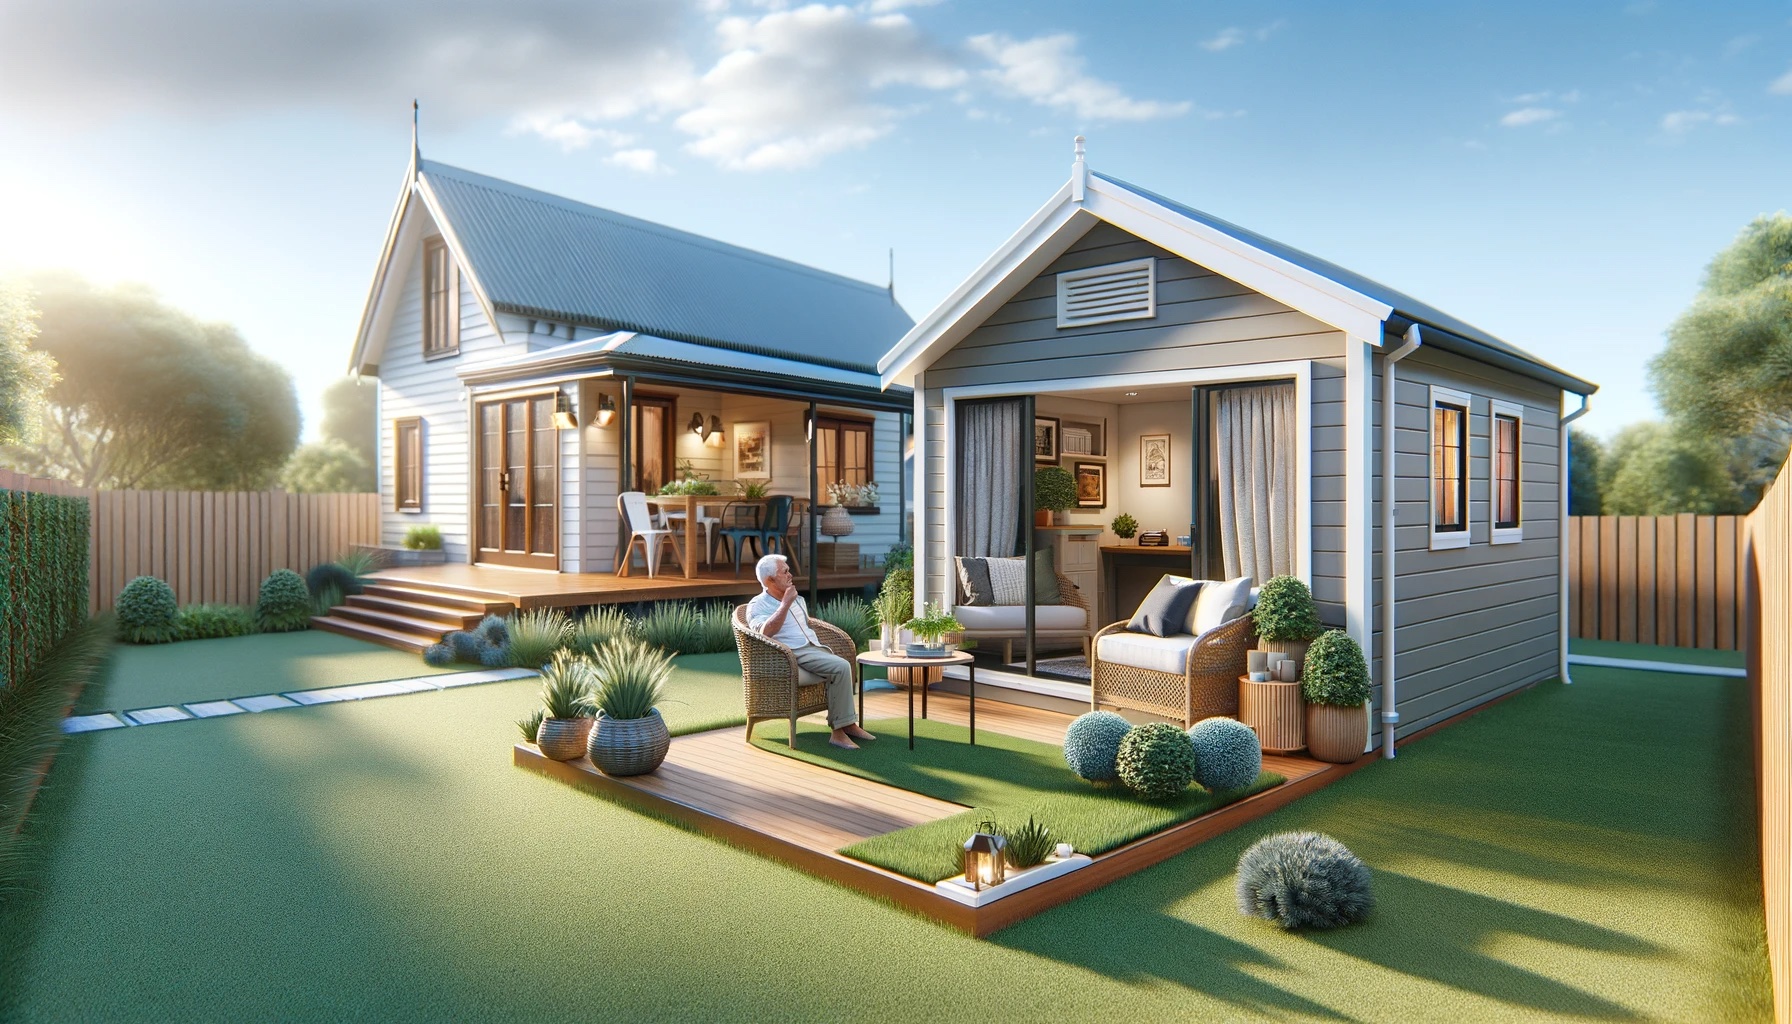 Discover how Aussie families are embracing granny flats amidst rising living costs